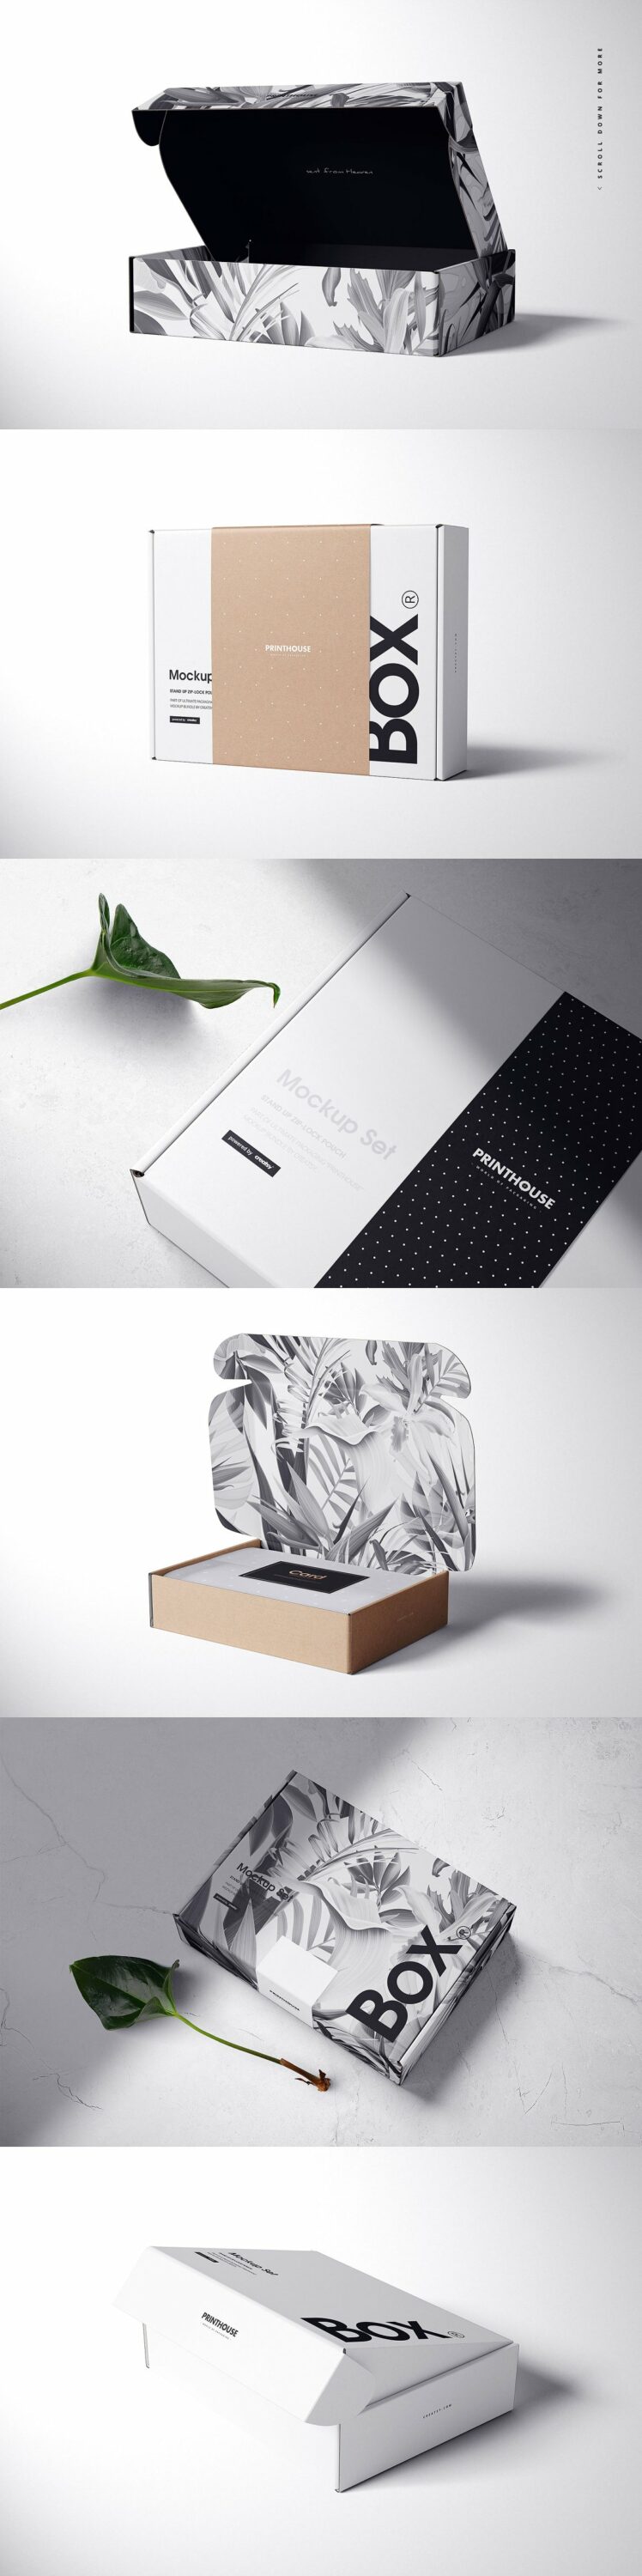 A selection of images of mailing box with a lovely design.